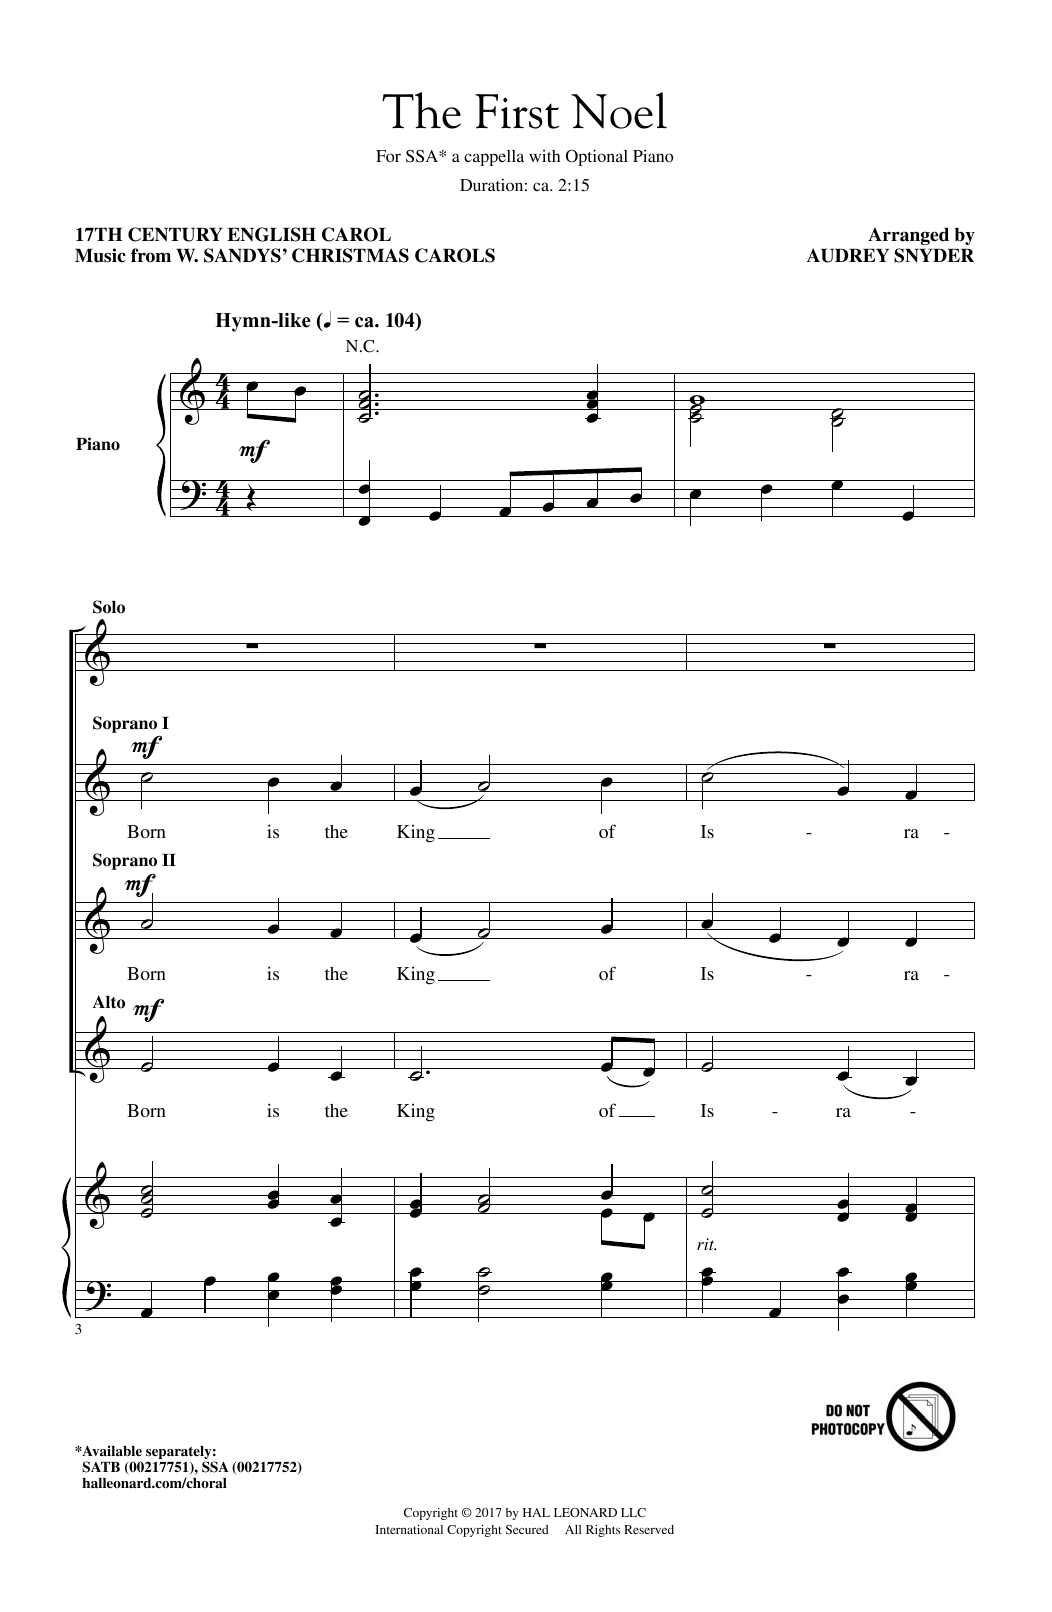 Download Audrey Snyder The First Noel Sheet Music